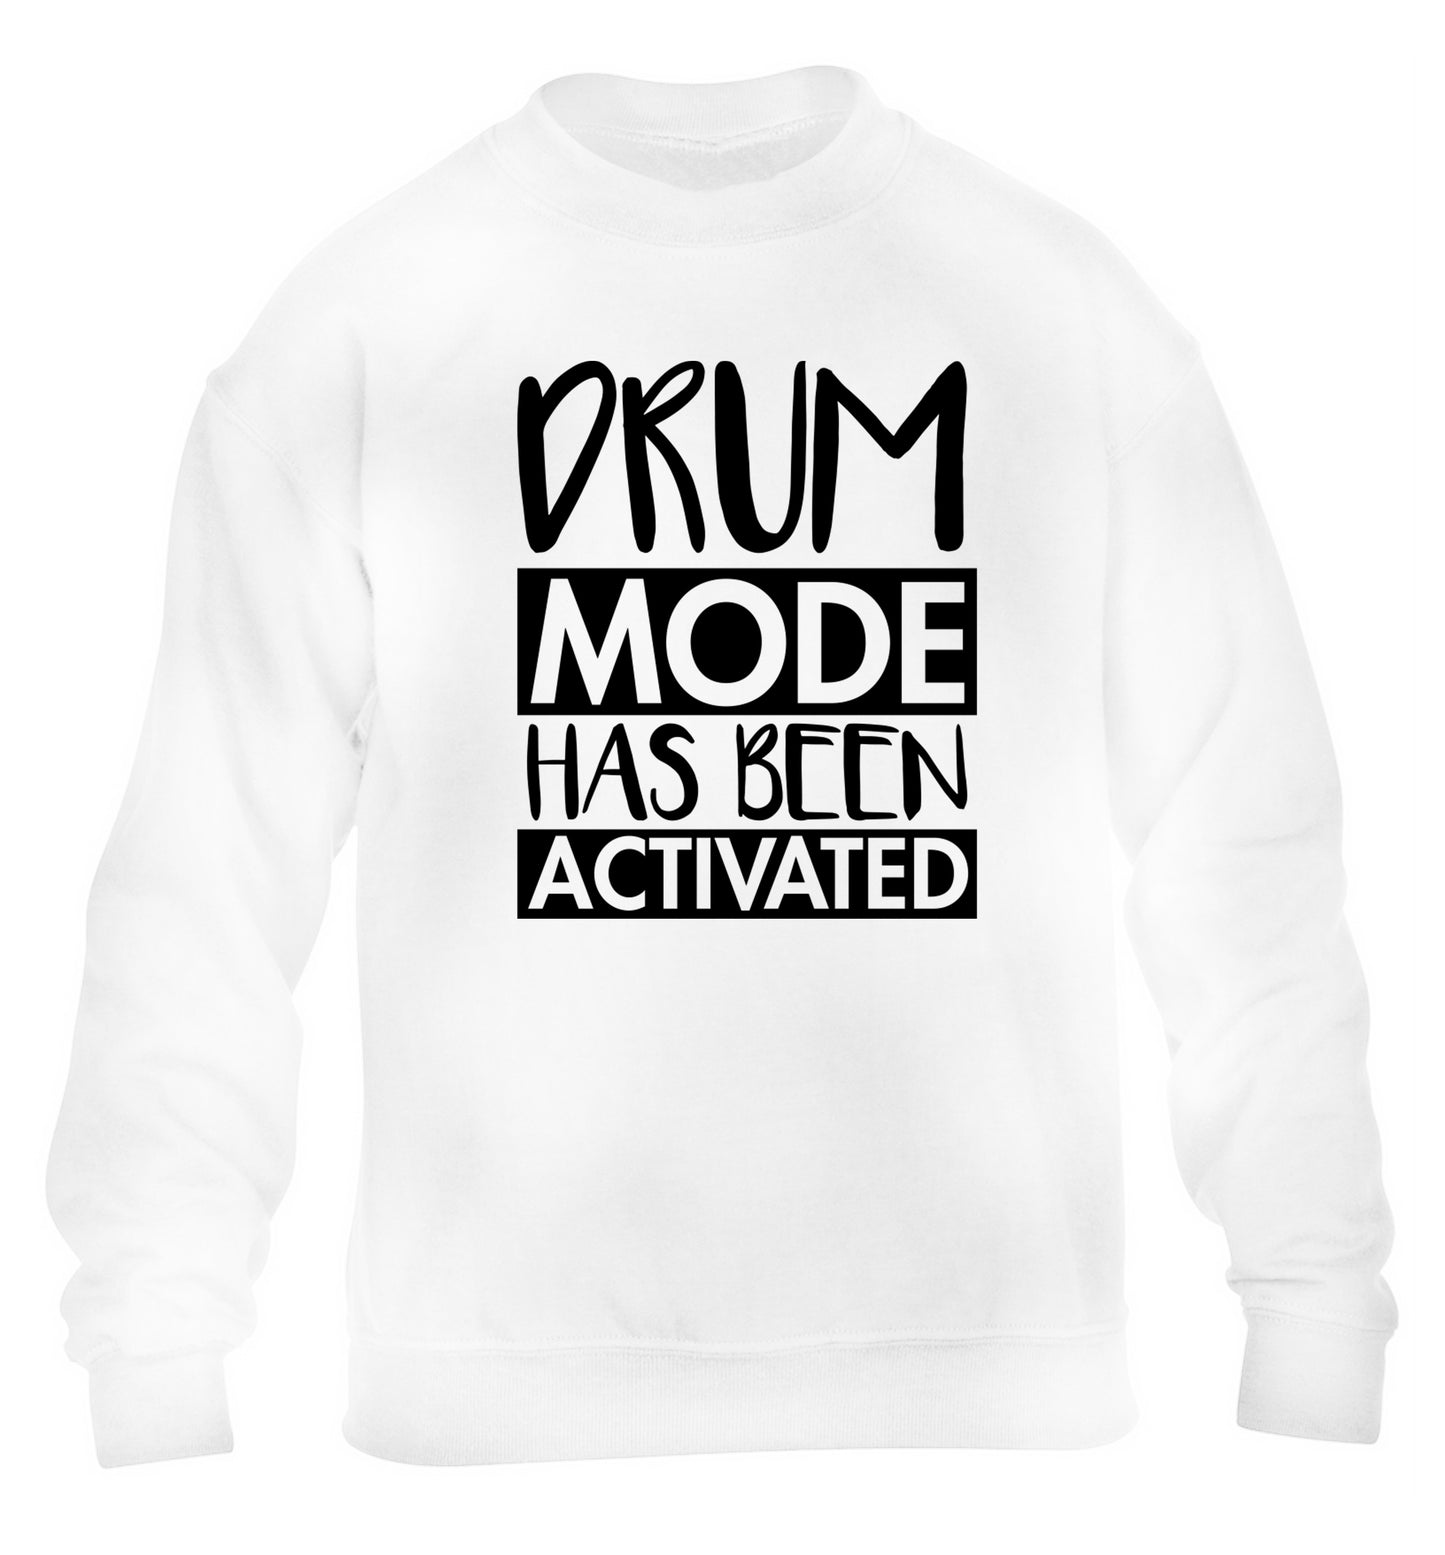 Drum mode activated children's white sweater 12-14 Years